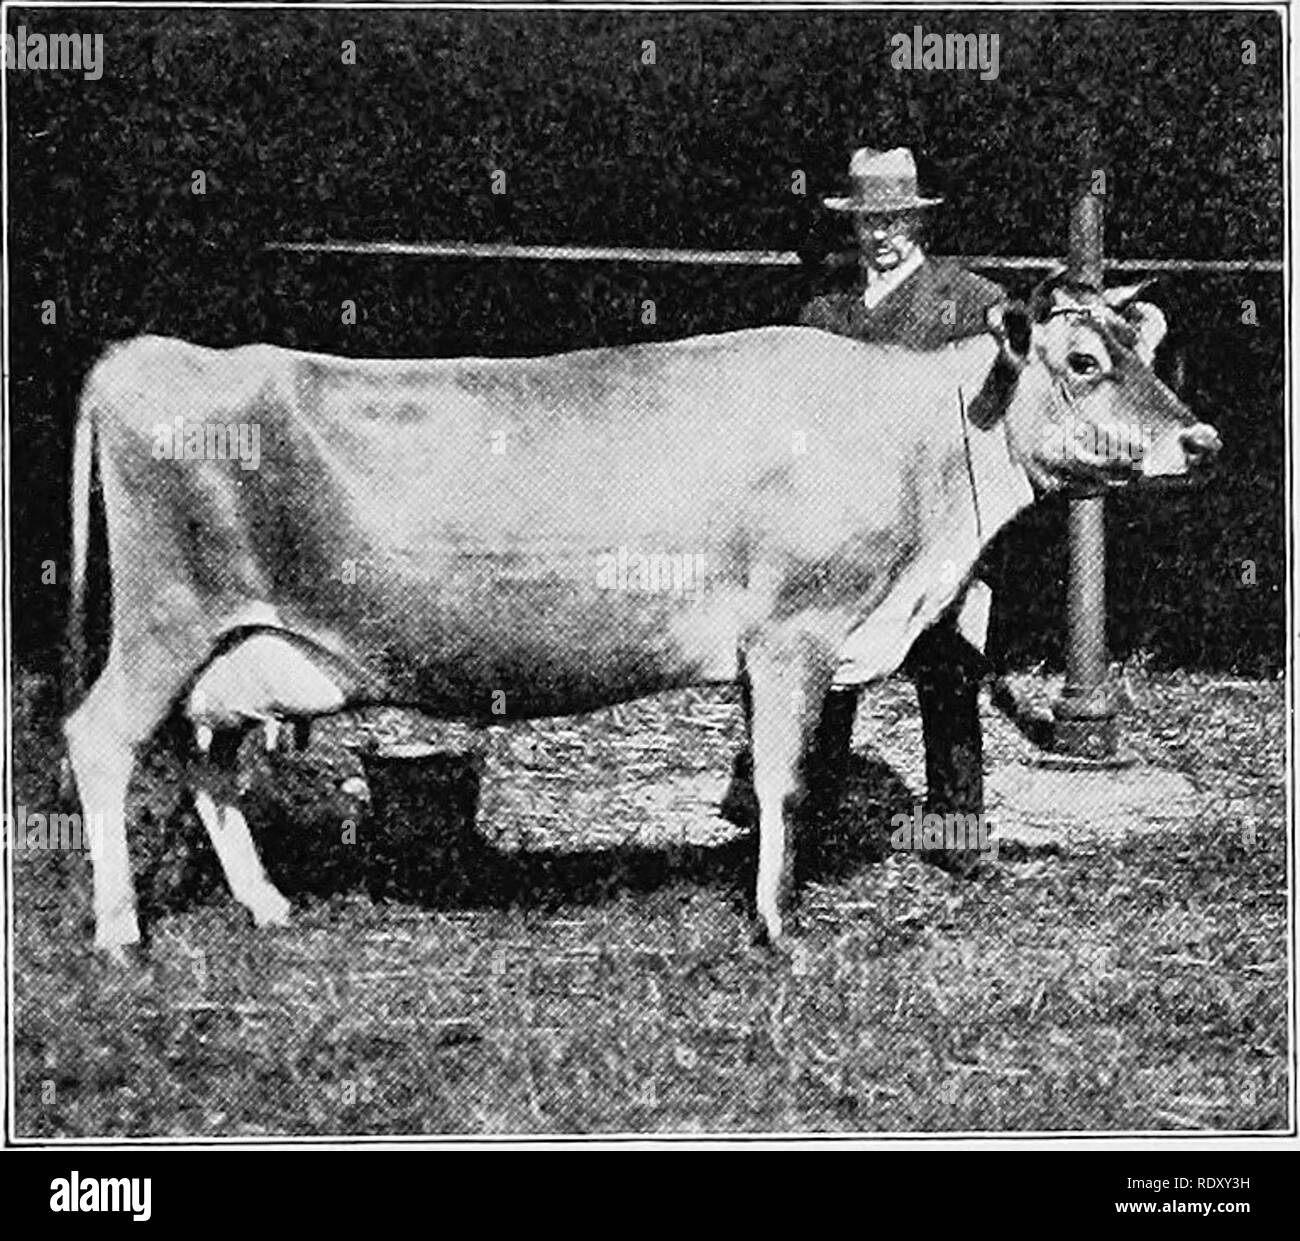 . Types and breeds of farm animals. Livestock. THE JERSEY 341 The Rosette family traces from Rosette through her daughter Rosette 2d, F. 943 H. C. and her granddaughter Rosette ^th, P. 2128 C. Bred to Sarabond, P. 797 H. C, Rosette 4th pro- duced Rosette sth, P. 2881 H. C, imported by Mr. Cooper under the name of Sultana's Rosette 149740. She proved a remark- able breeder and dropped the bulls Flying Fox, P. 2729 H. C. (Champion Flying Fox 61441, imp.), Ravachol, P. 2032 C, and Forfarshire, P. 2914 H. C.,. three of the great island-bred bulls, and the cow Alicante, P. 3880 H. C, dam of the Owl Stock Photo